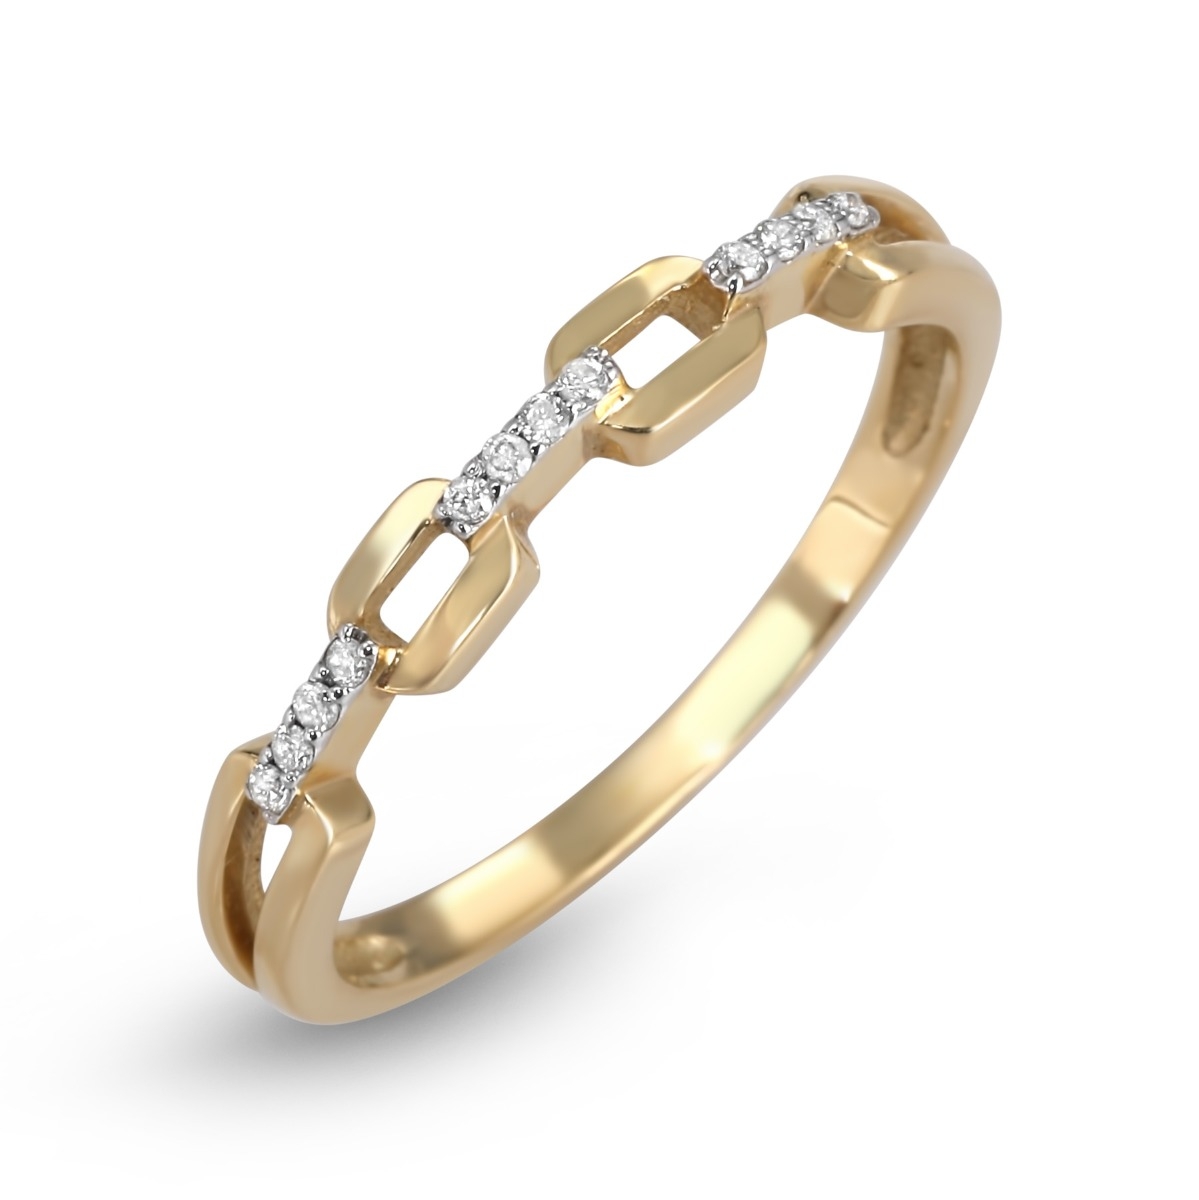 Diamond-Studded 14K Gold Ring With Chain Design - 1